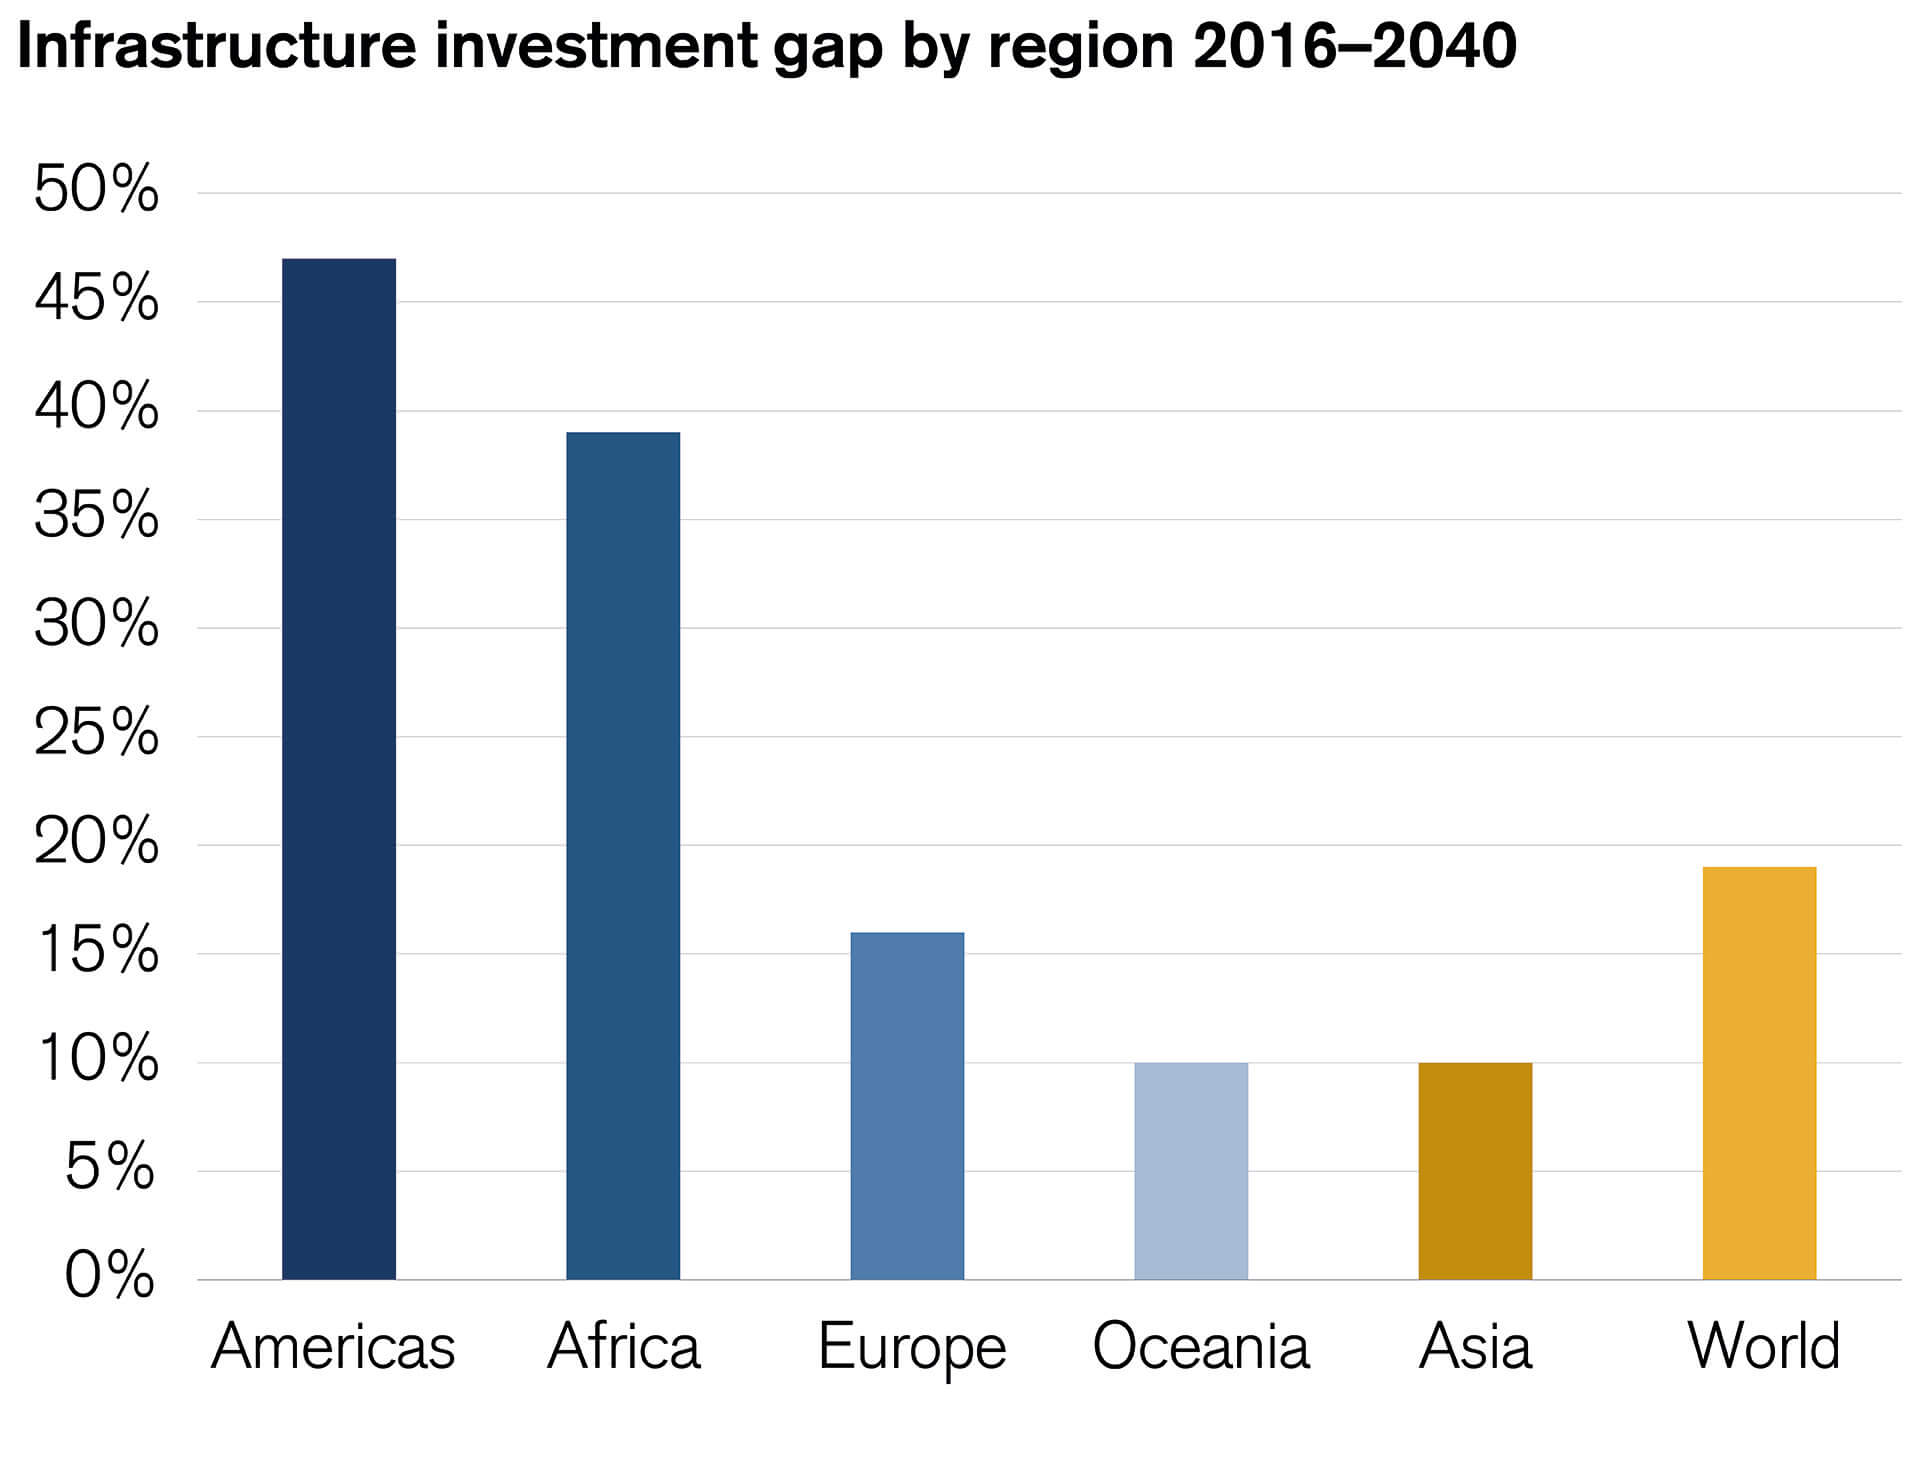 Vertical bar chart showing the infrastructure investment gap by region in the years 2016-2040.